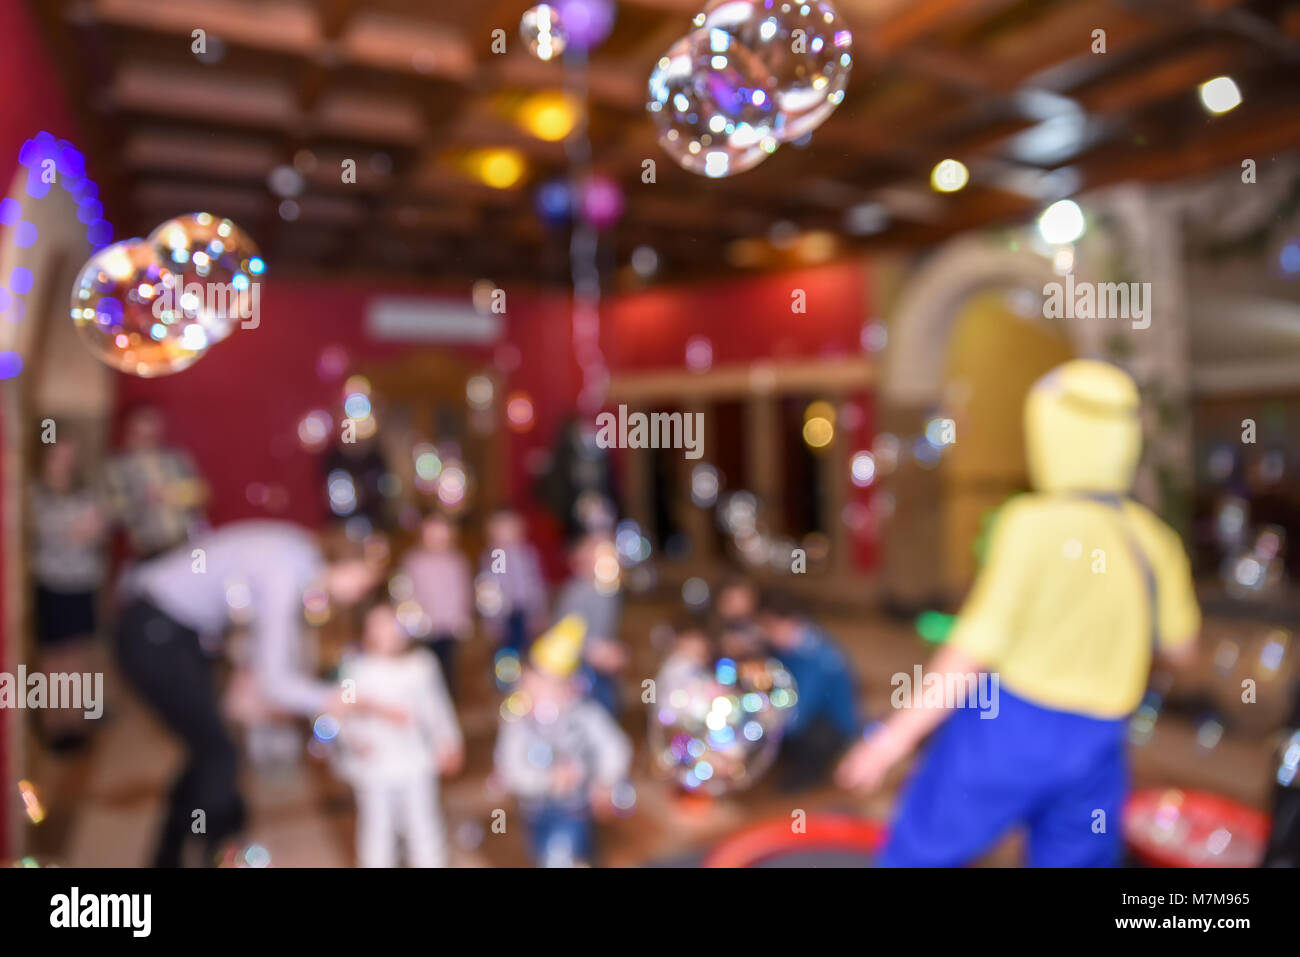 Soap bubble show, birthday party, entertainment for children, blurry background Stock Photo